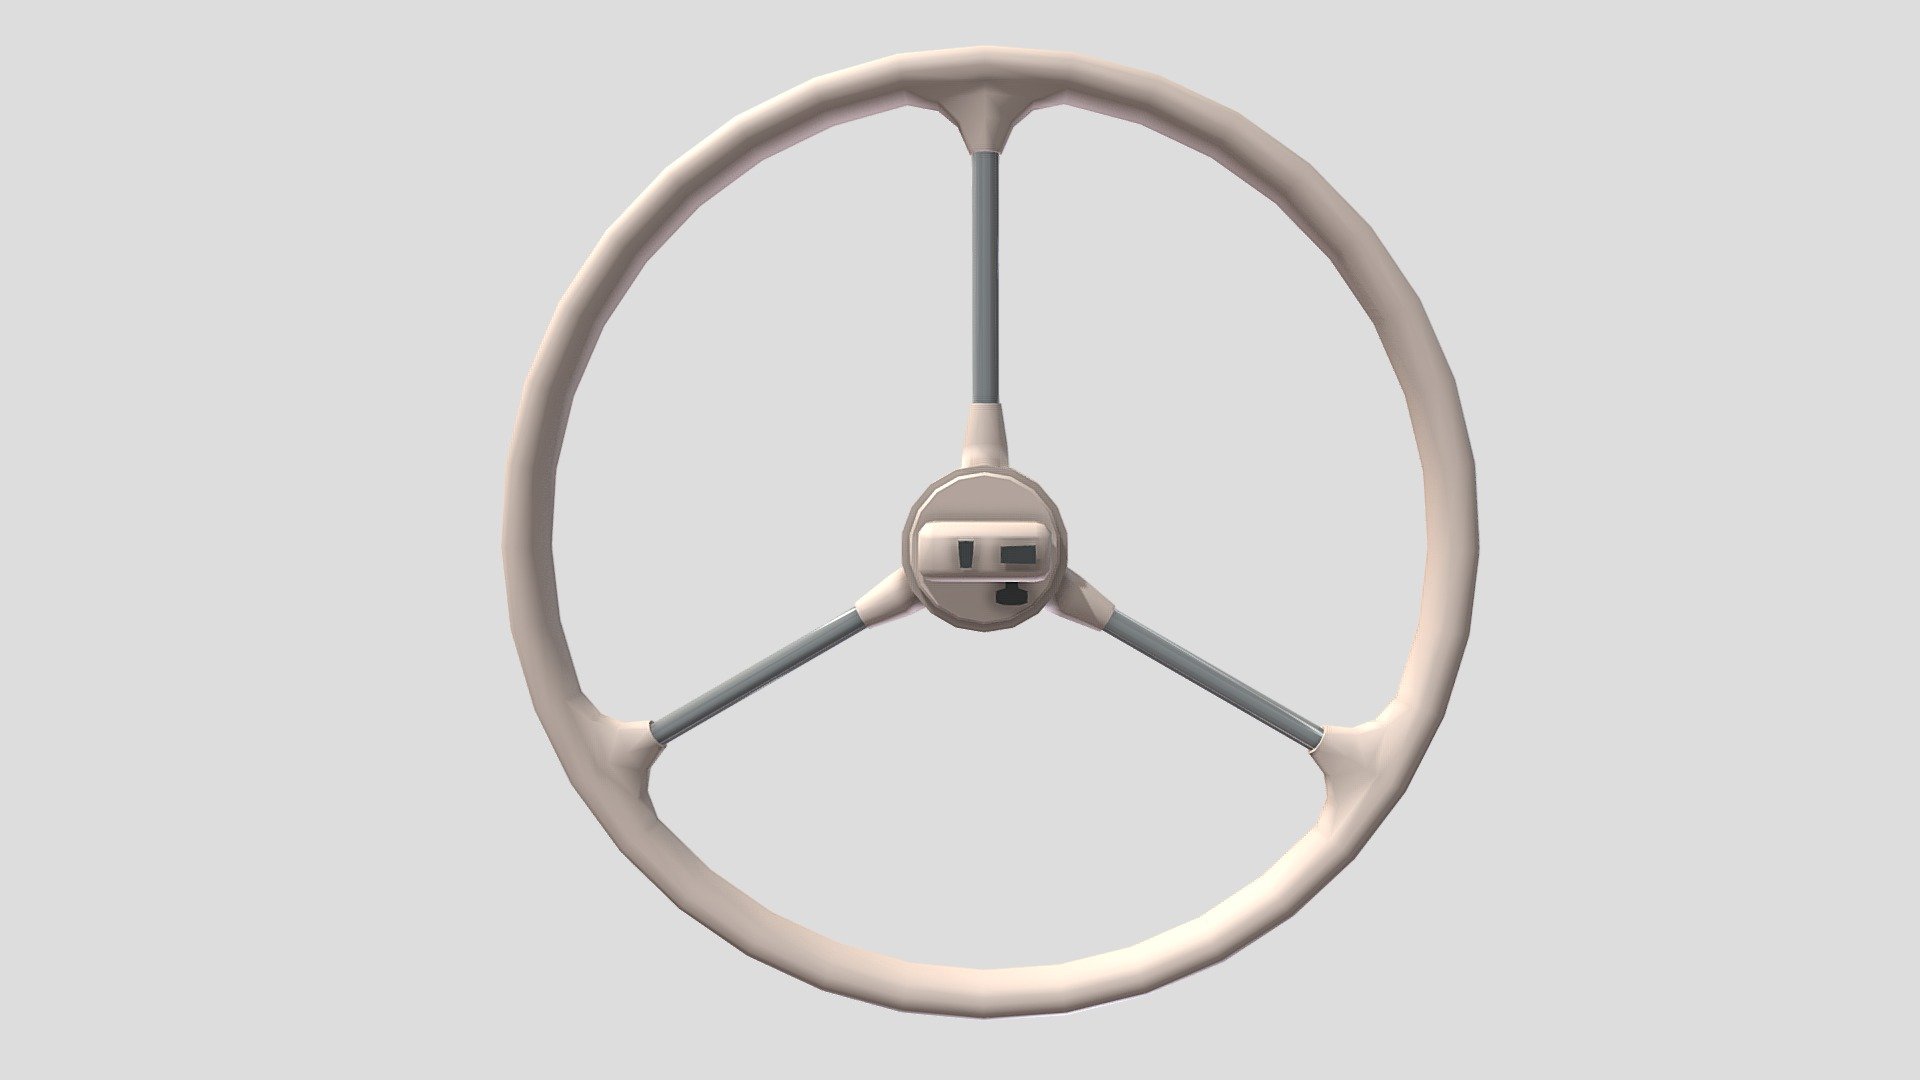 Steering wheel 3d model rendered with Cycles in Blender, as per seen on attached images. 
The 3d model is scaled to original size in Blender.

File formats:
-.blend, rendered with cycles, as seen in the images;
-.obj, with materials applied;
-.dae, with materials applied;
-.fbx, with materials applied;
-.stl;

Files come named appropriately and split by file format.

3D Software:
The 3D model was originally created in Blender 2.8 and rendered with Cycles.

Materials and textures:
The models have materials applied in all formats, and are ready to import and render.

Preview scenes:
The preview images are rendered in Blender using its built-in render engine &lsquo;Cycles' 3d model